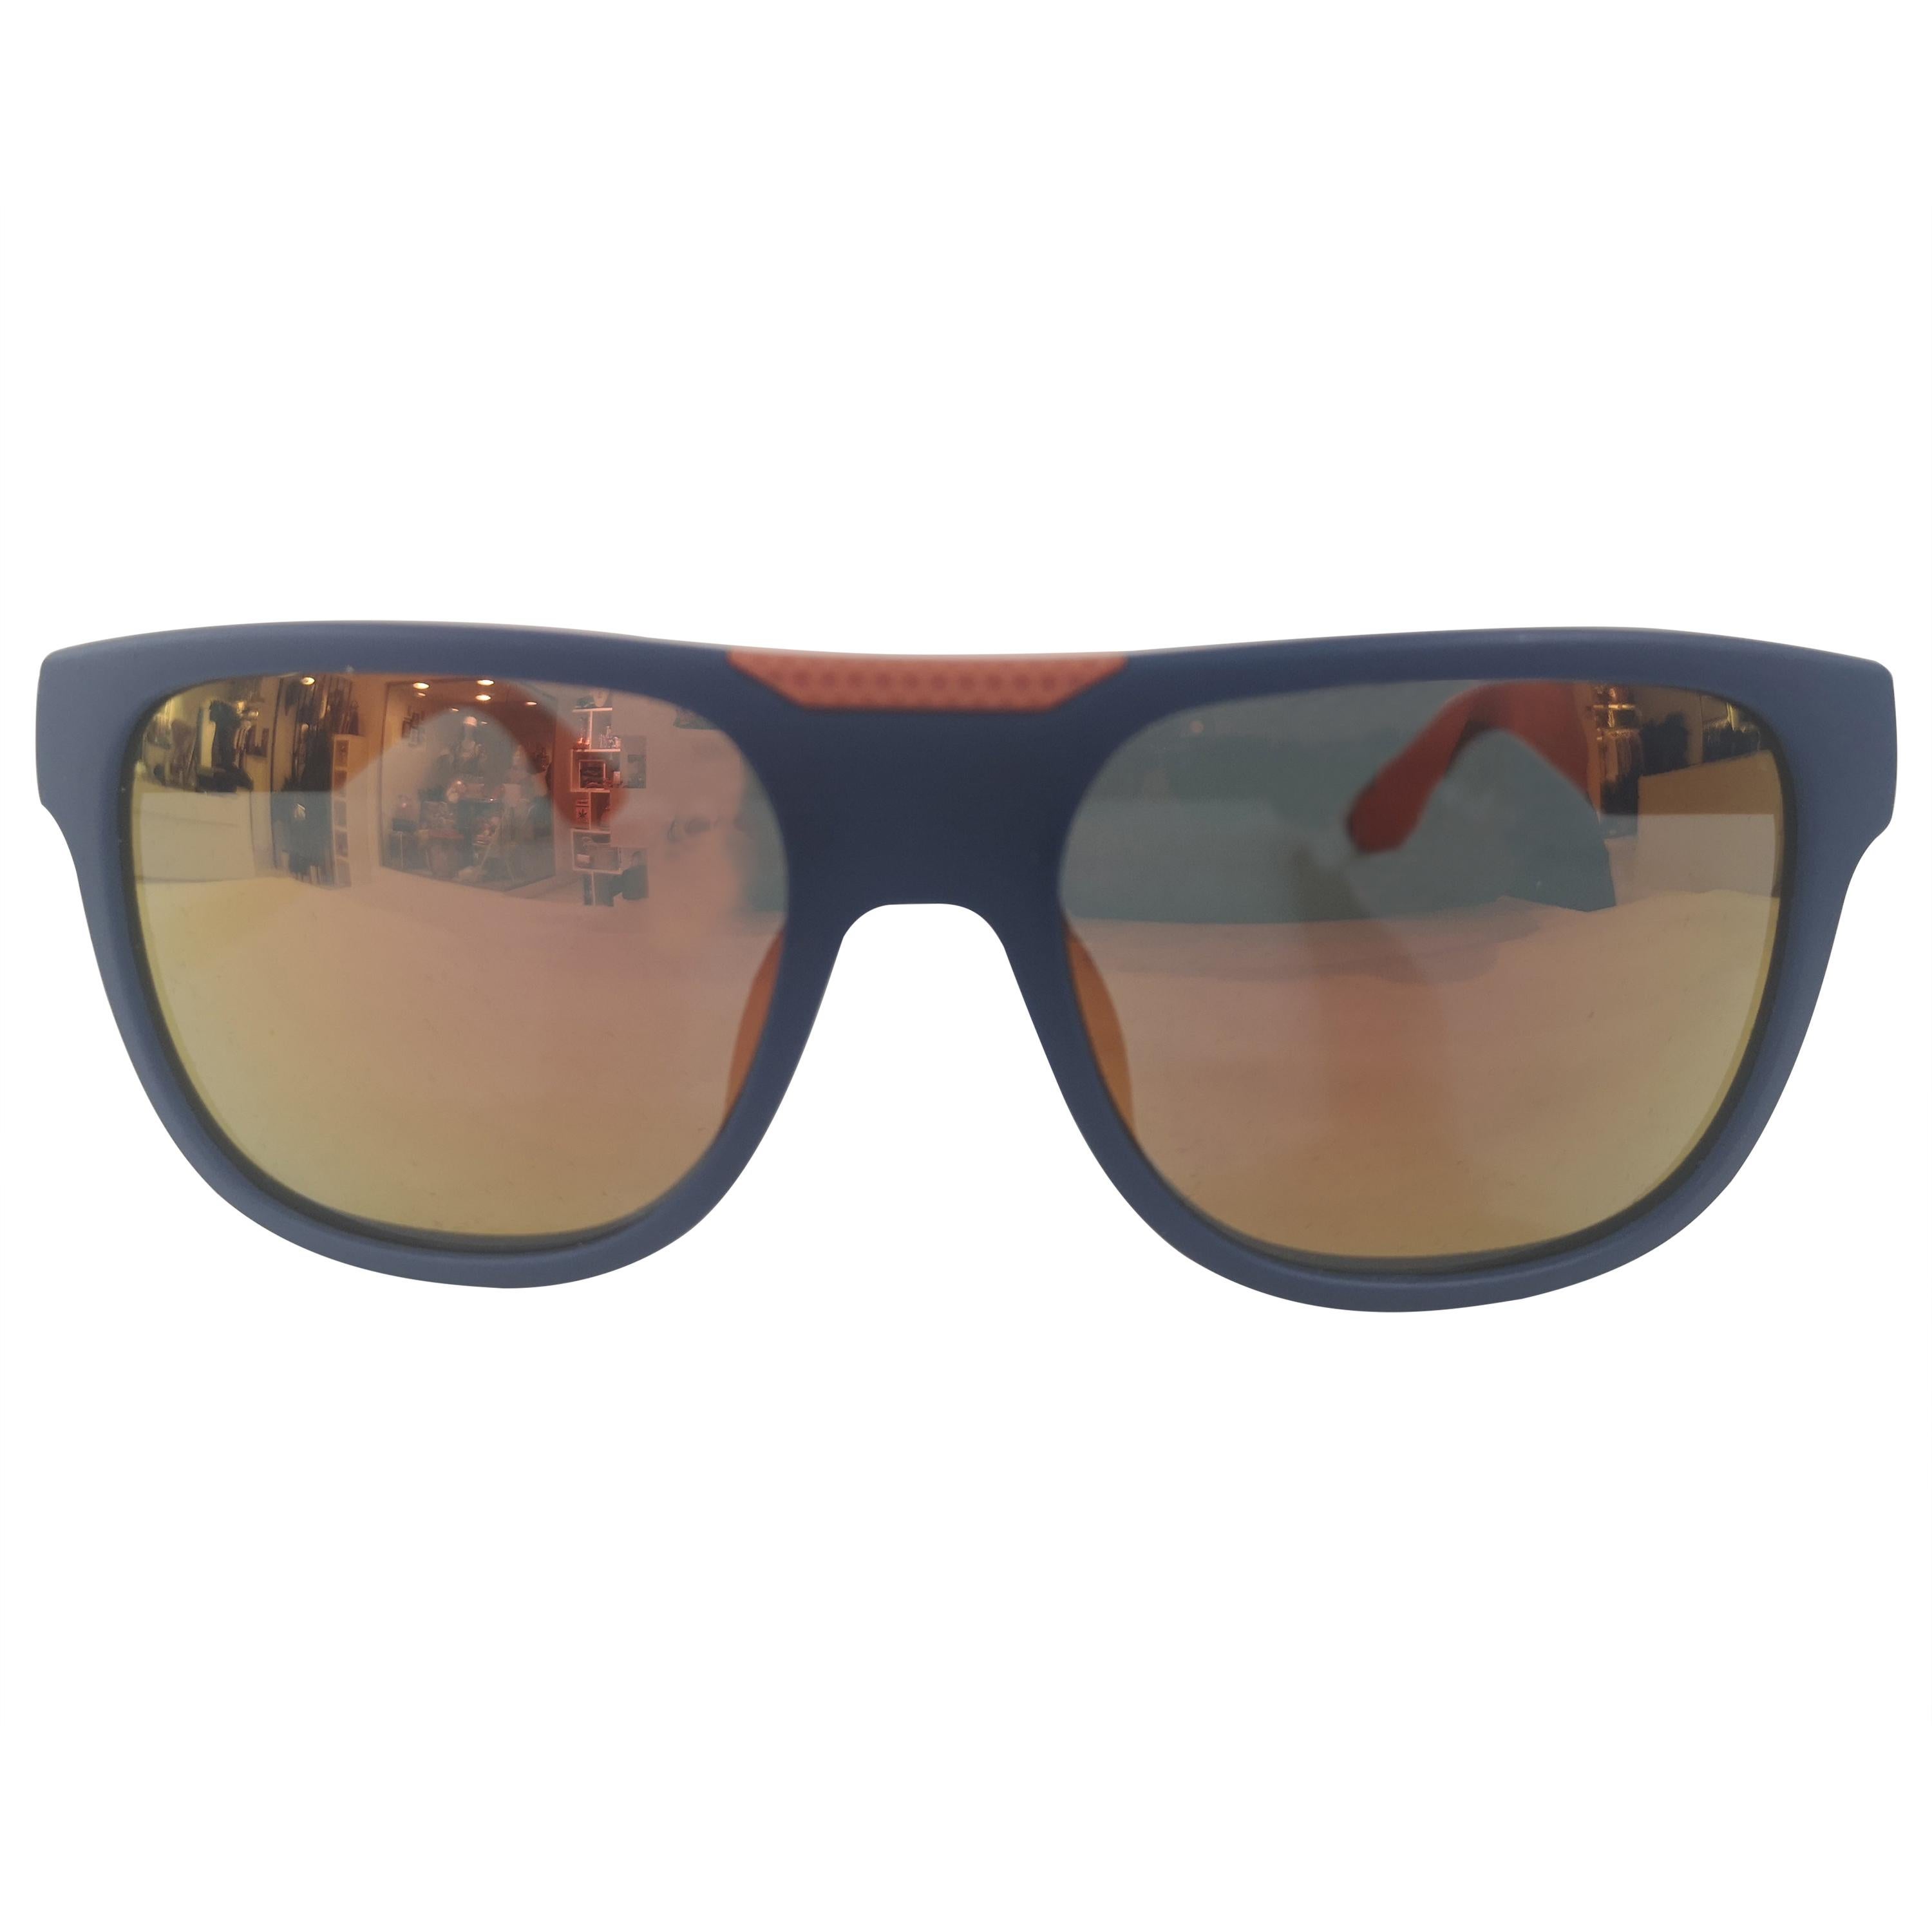 Marc by Marc Jacobs blue and orange sunglasses NWOT For Sale